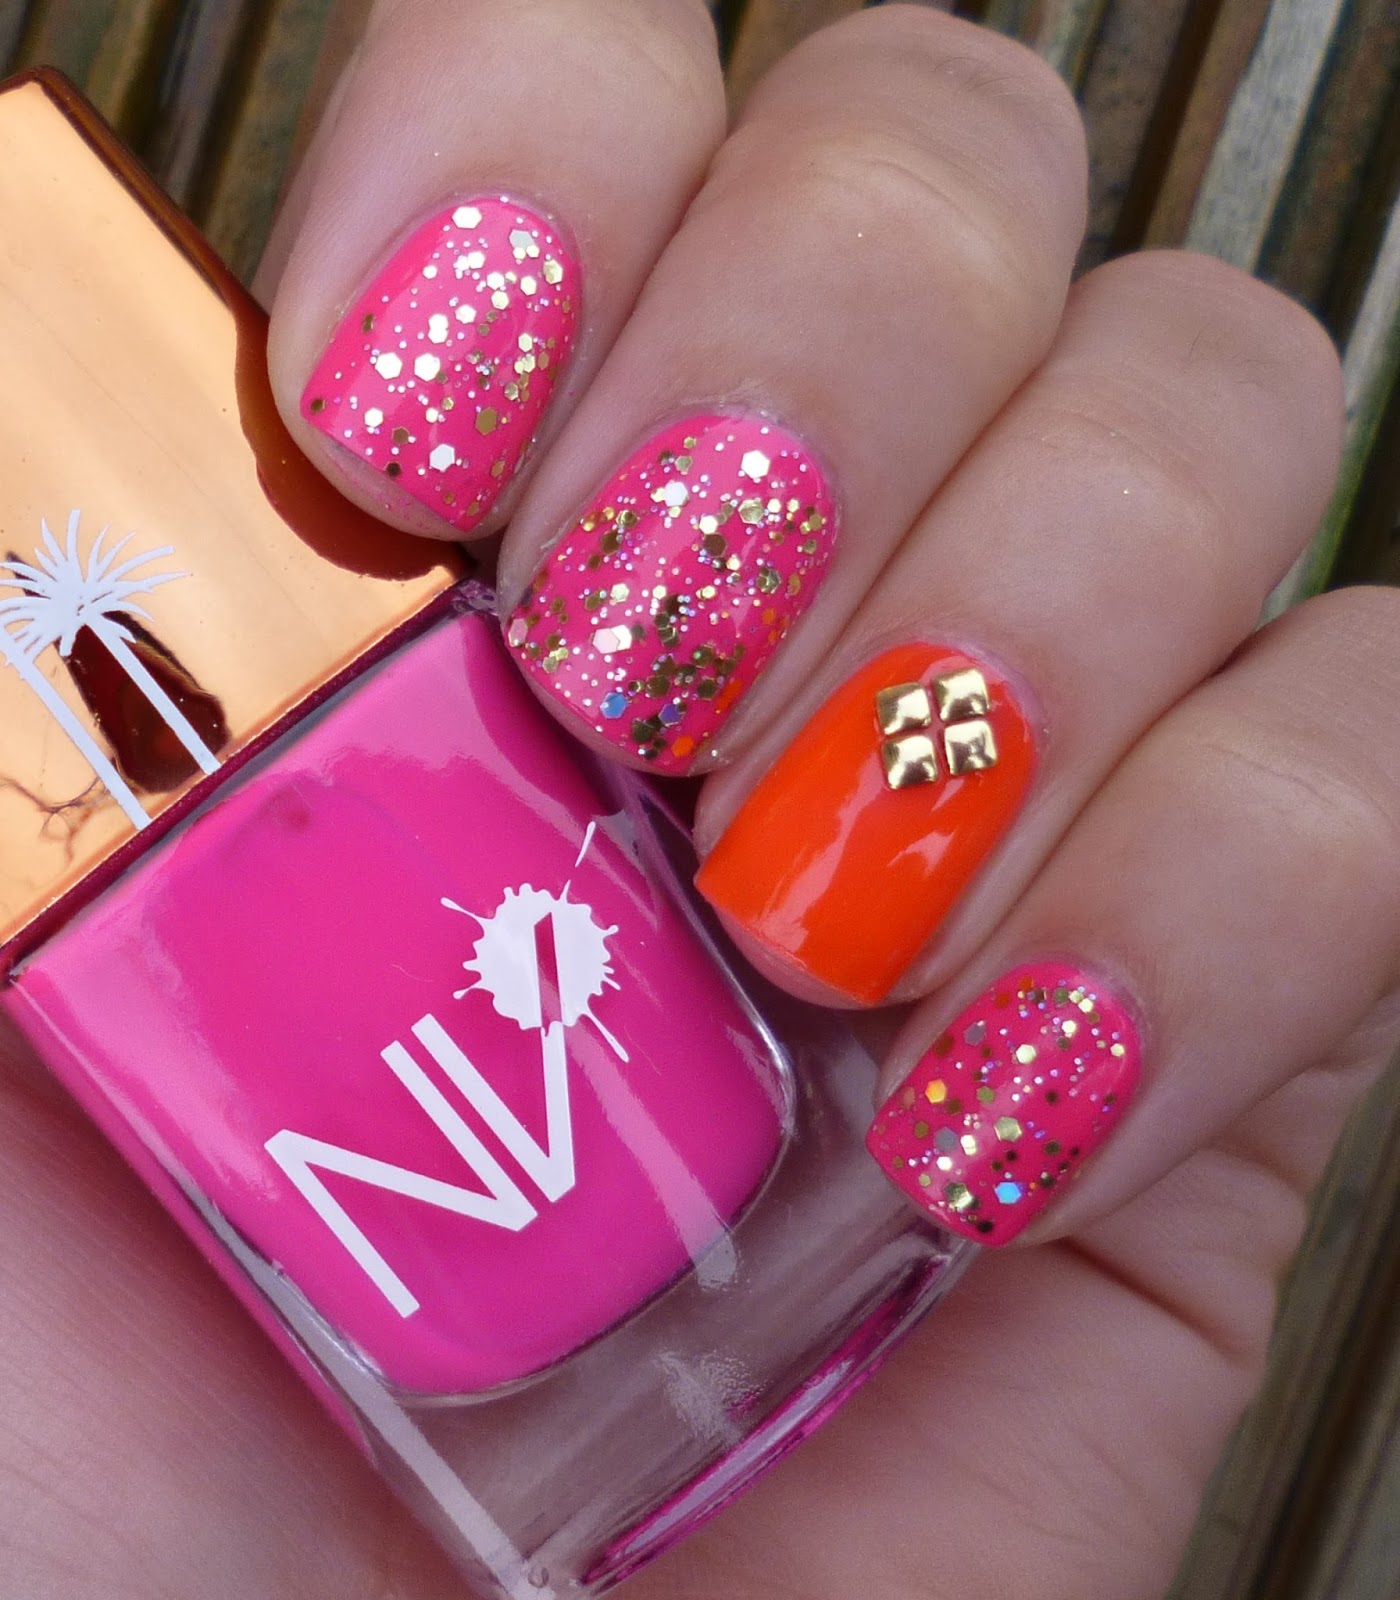 Lou is Perfectly Polished: Pink and Orange: Same Accent Nail